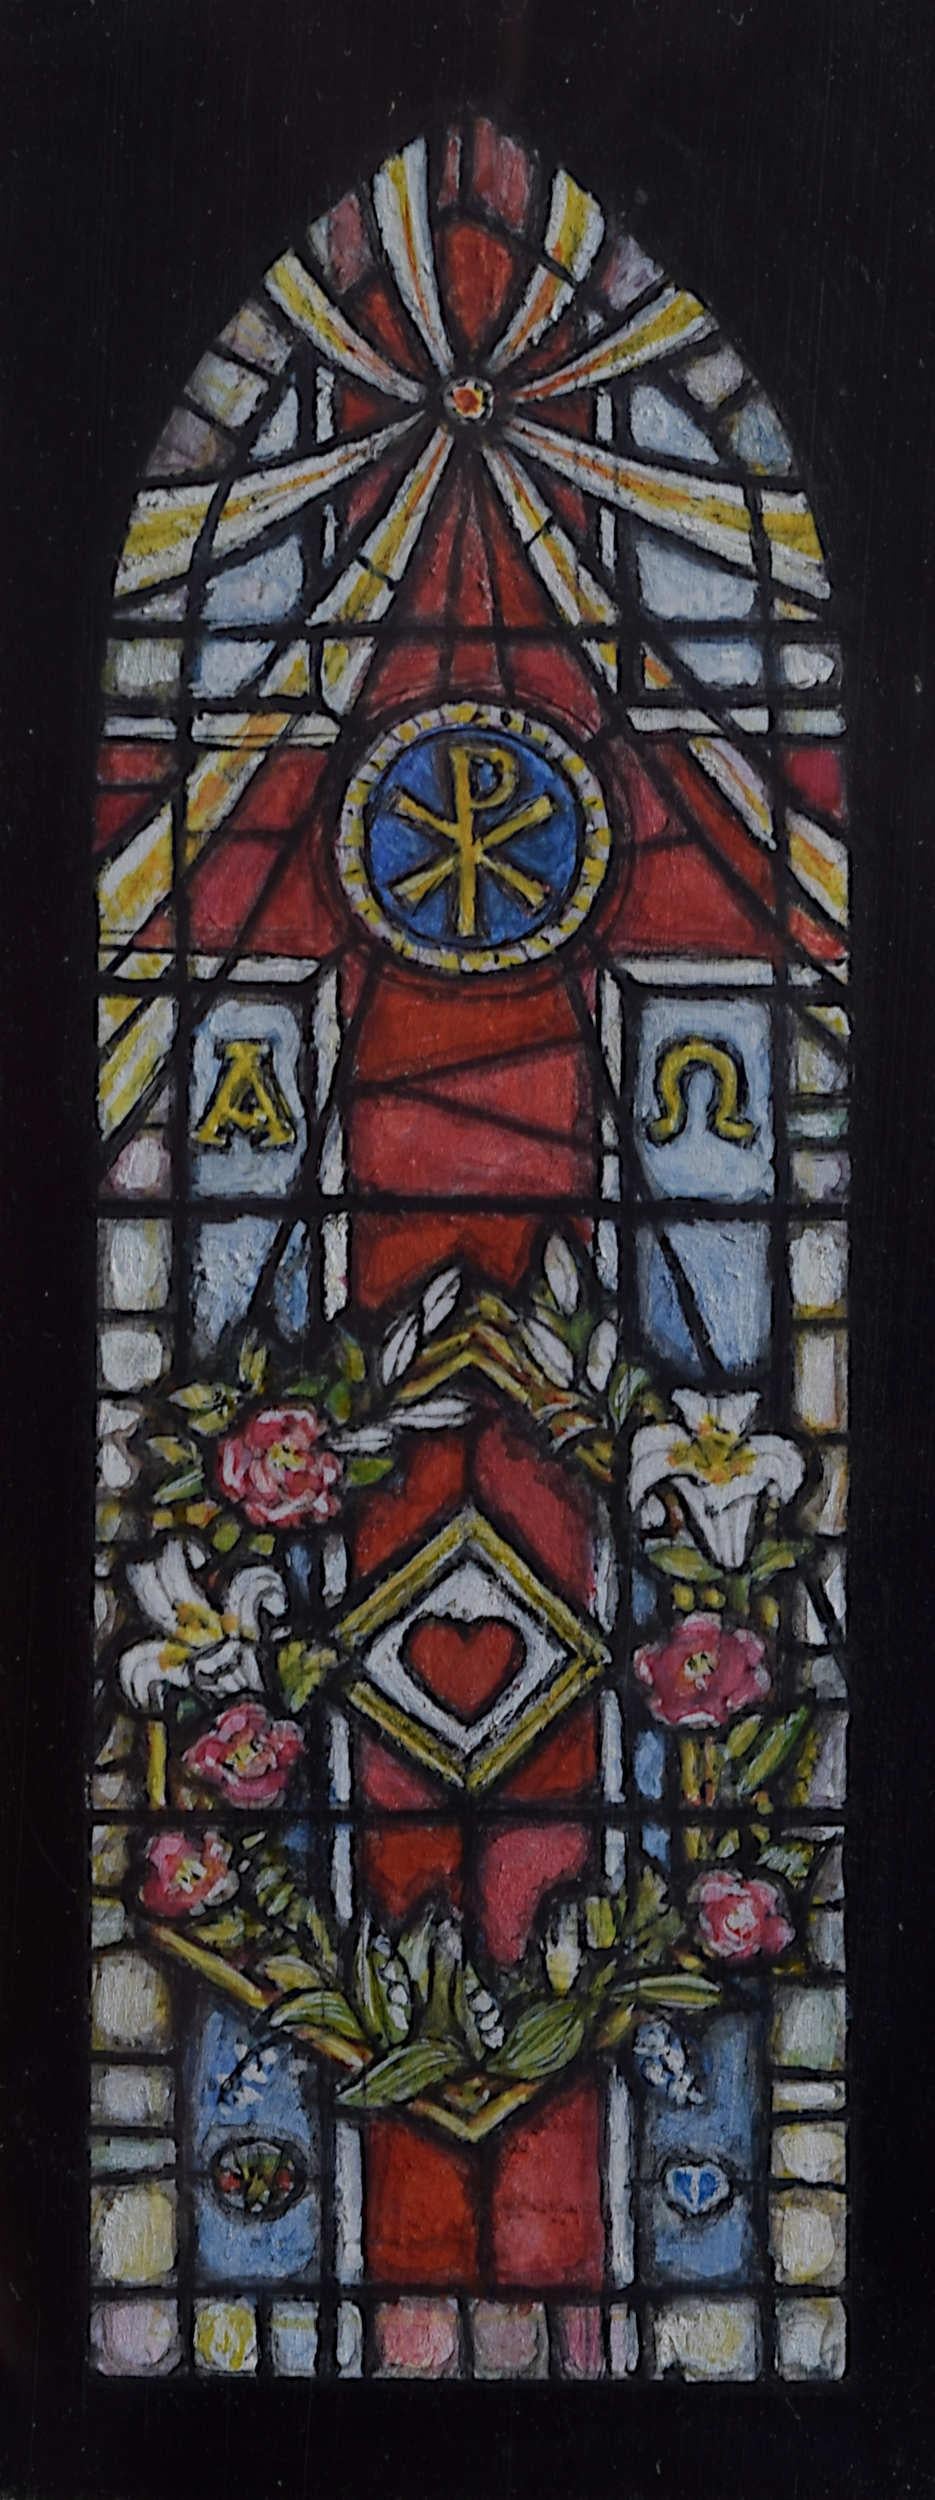 We acquired a series of watercolour stained glass designs from Jane Gray's studio. To find more scroll down to "More from this Seller" and below it click on "See all from this seller." 

Jane Gray (b.1931)
Stained Glass Design
Watercolour
11.5 x 4.5